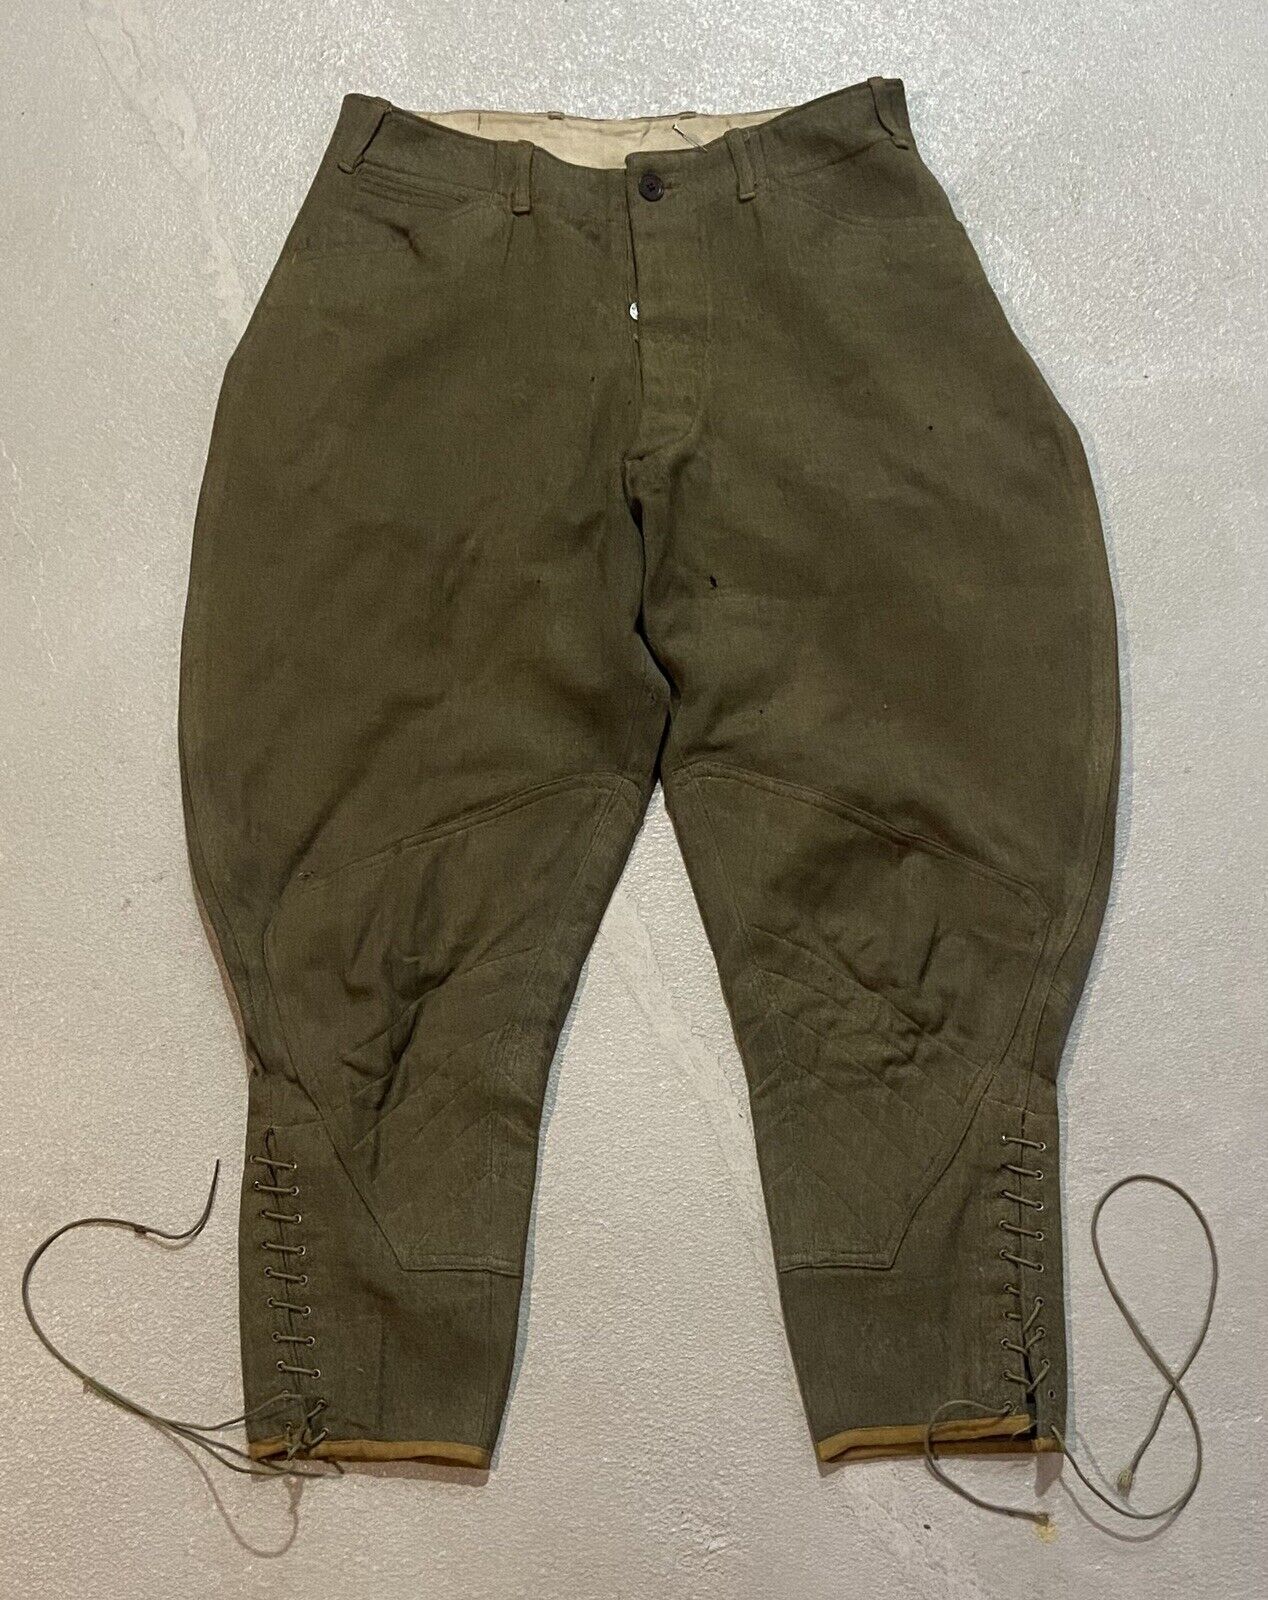 Vintage WW1 1917 US Army Wool Service Infantry Trousers Breeches Pants 32x26 EUC